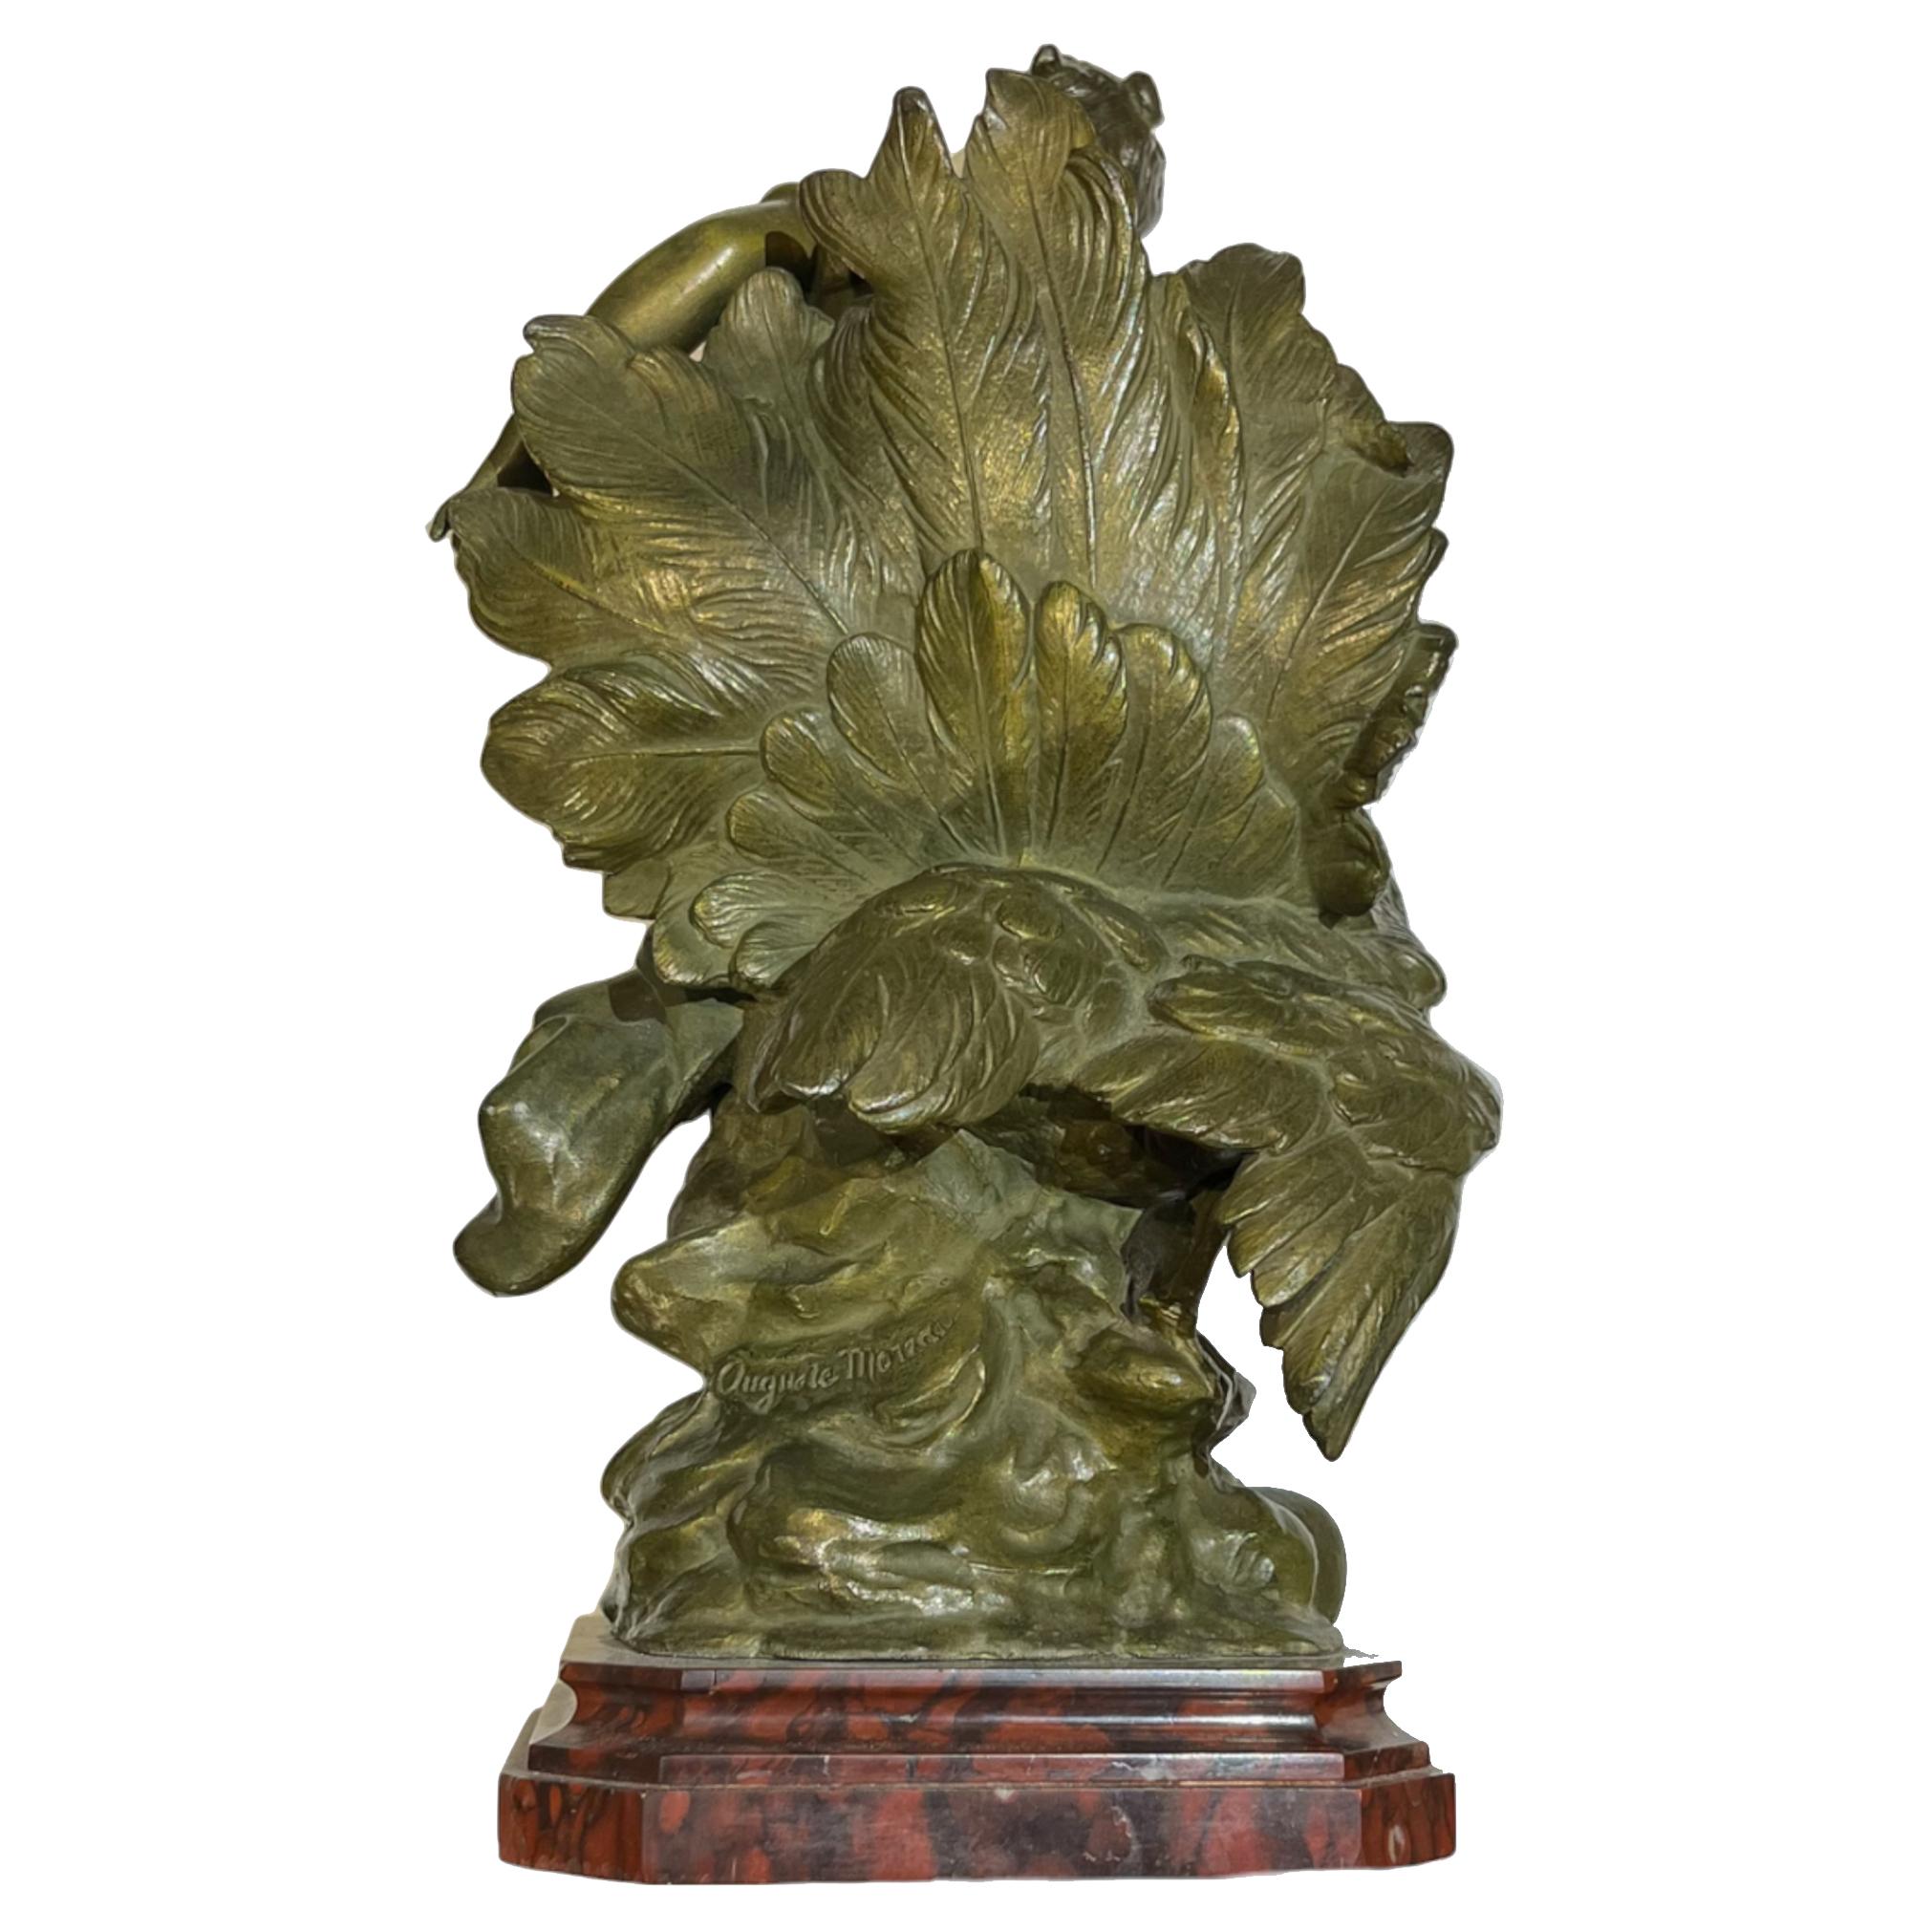 A Fine French Patinated Bronze Figure of Young Maiden sitting beside a Peacock surmounted atop a rouge marble plinth by Auguste Moreau.

Perfect size for a desk or dresser, or mantle ornament.

Maker: Auguste Moreau (1834-1917)
Auguste Moreau (1834